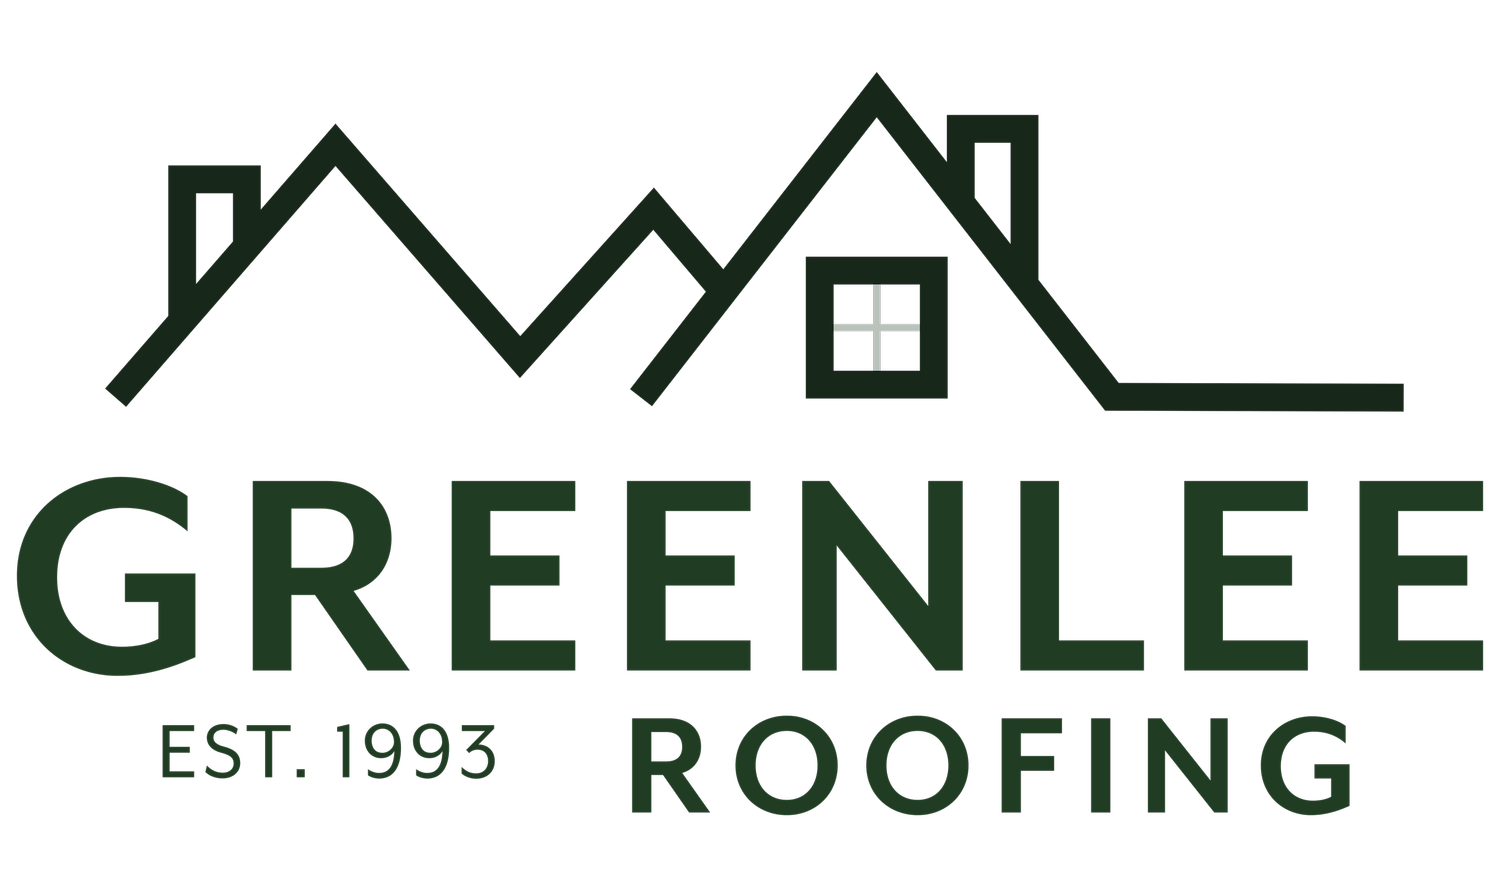 Greenlee Roofing